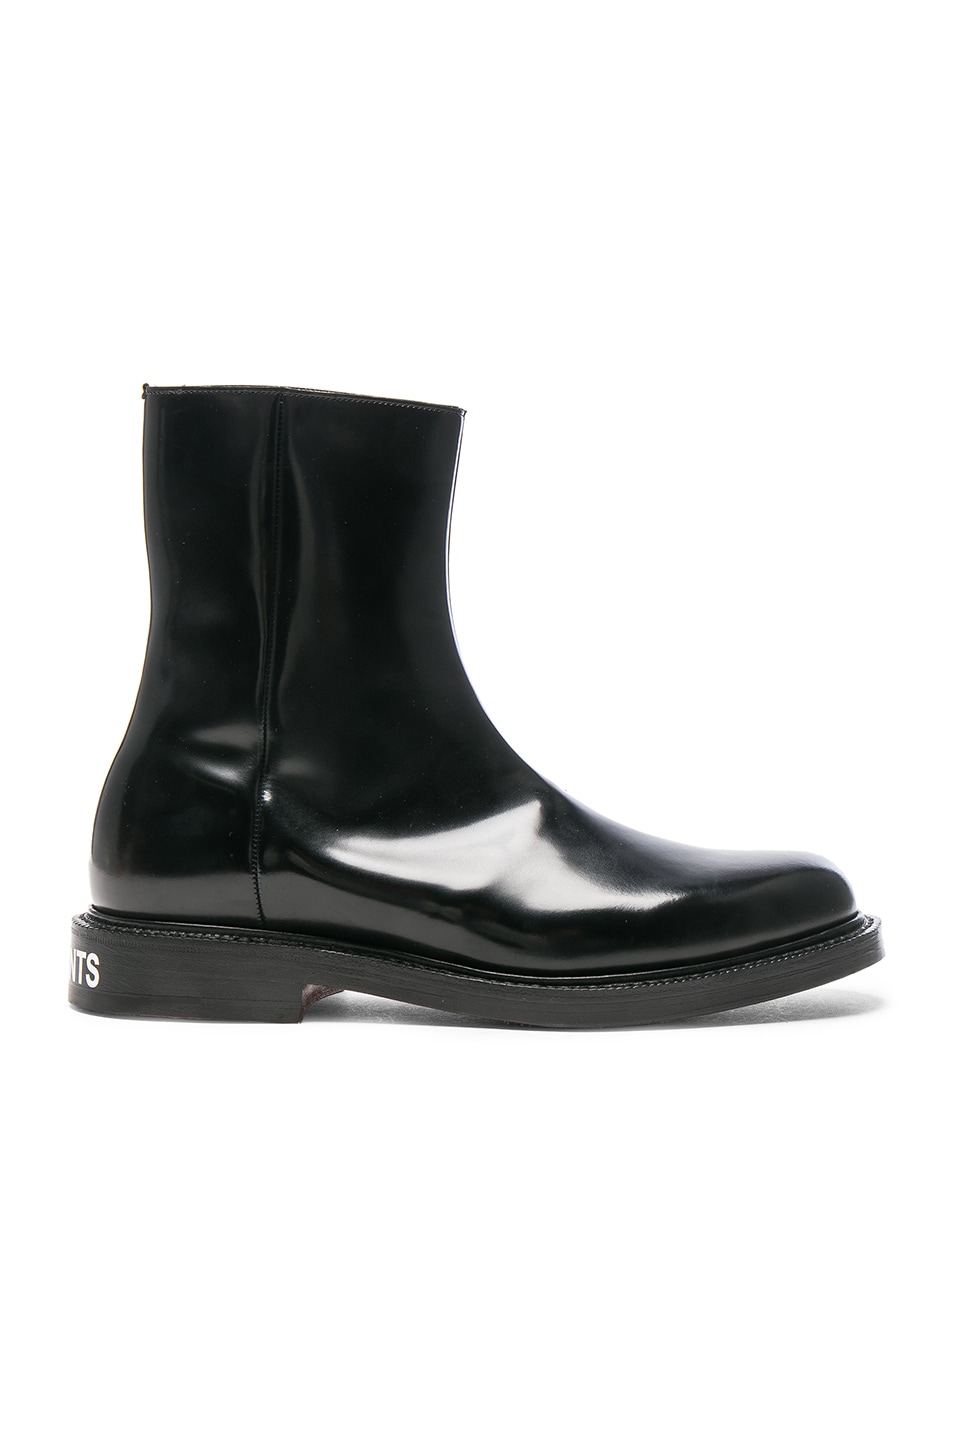 VETEMENTS x Church's Logo Leather Ankle Boots in Black | FWRD